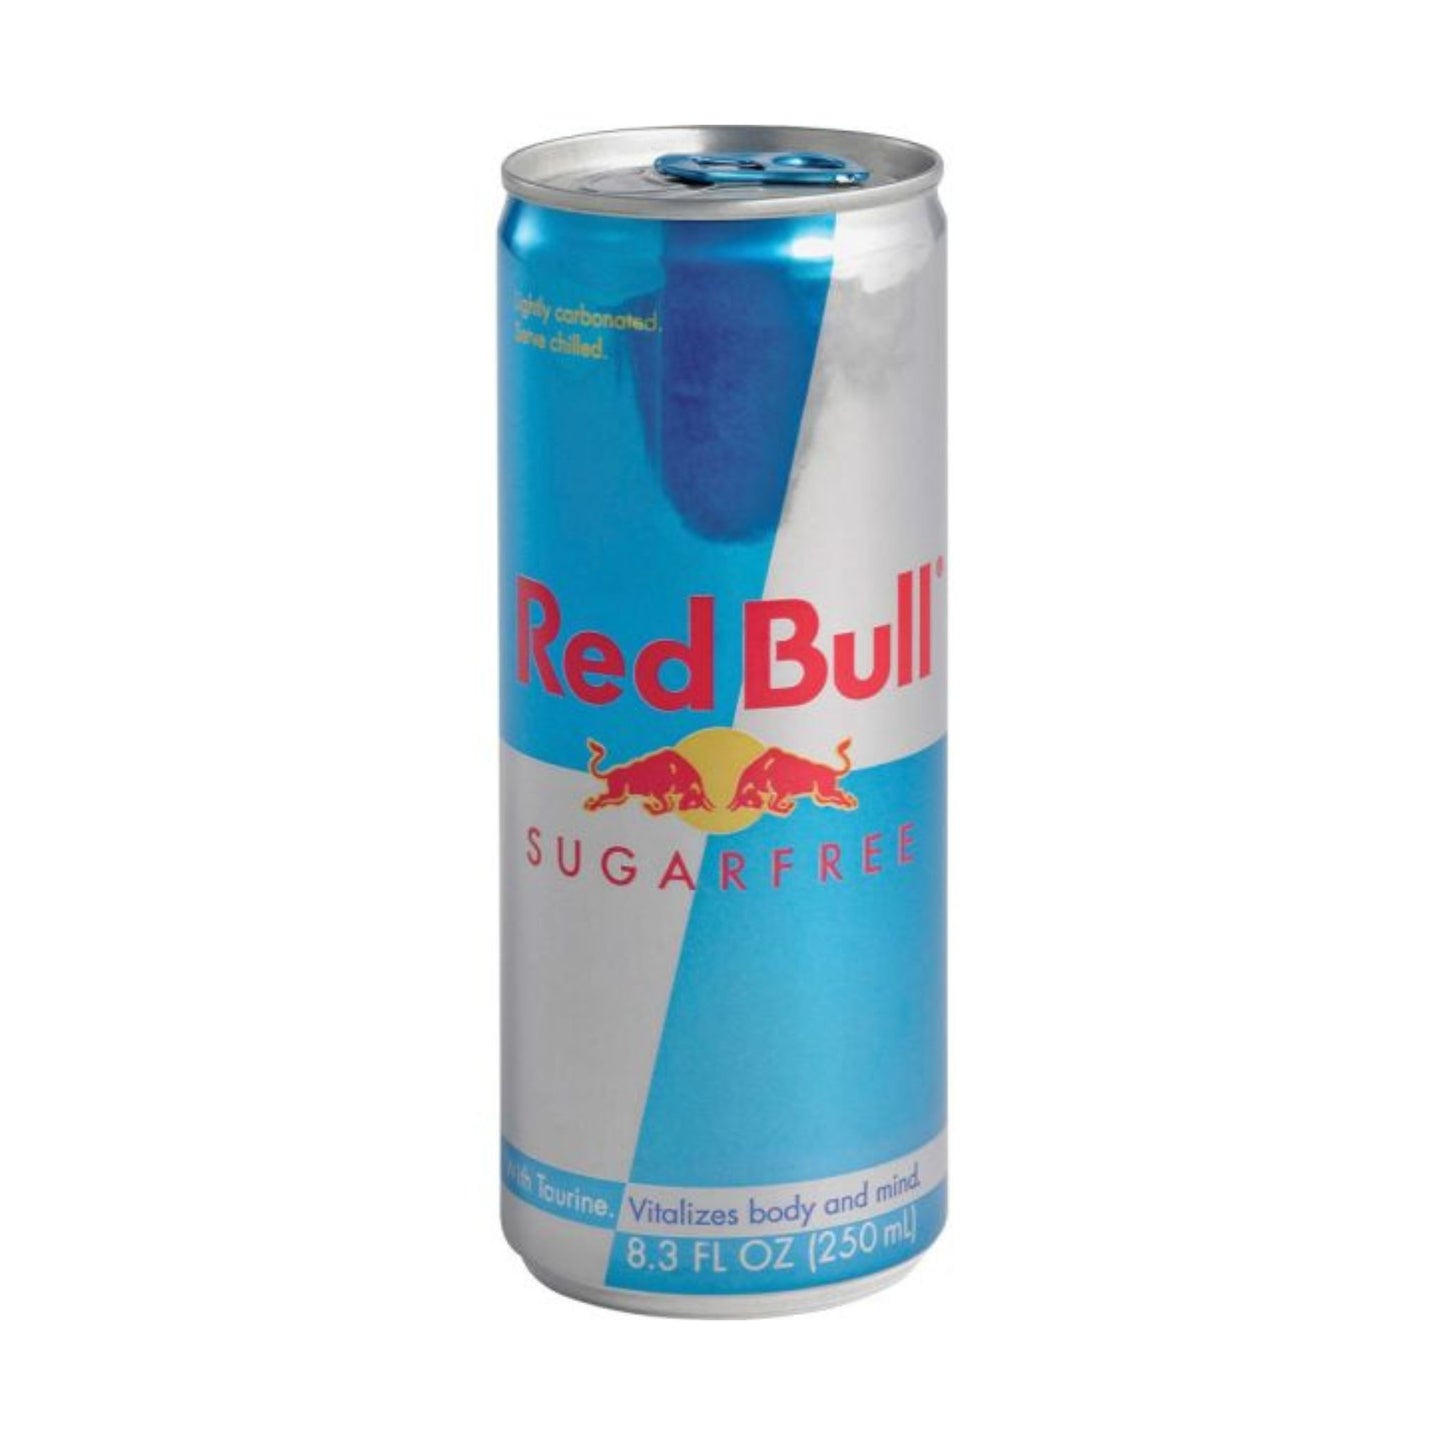 Red Bull Sugar-Free Energy Drink 8.3oz. Box Of 24 Cans